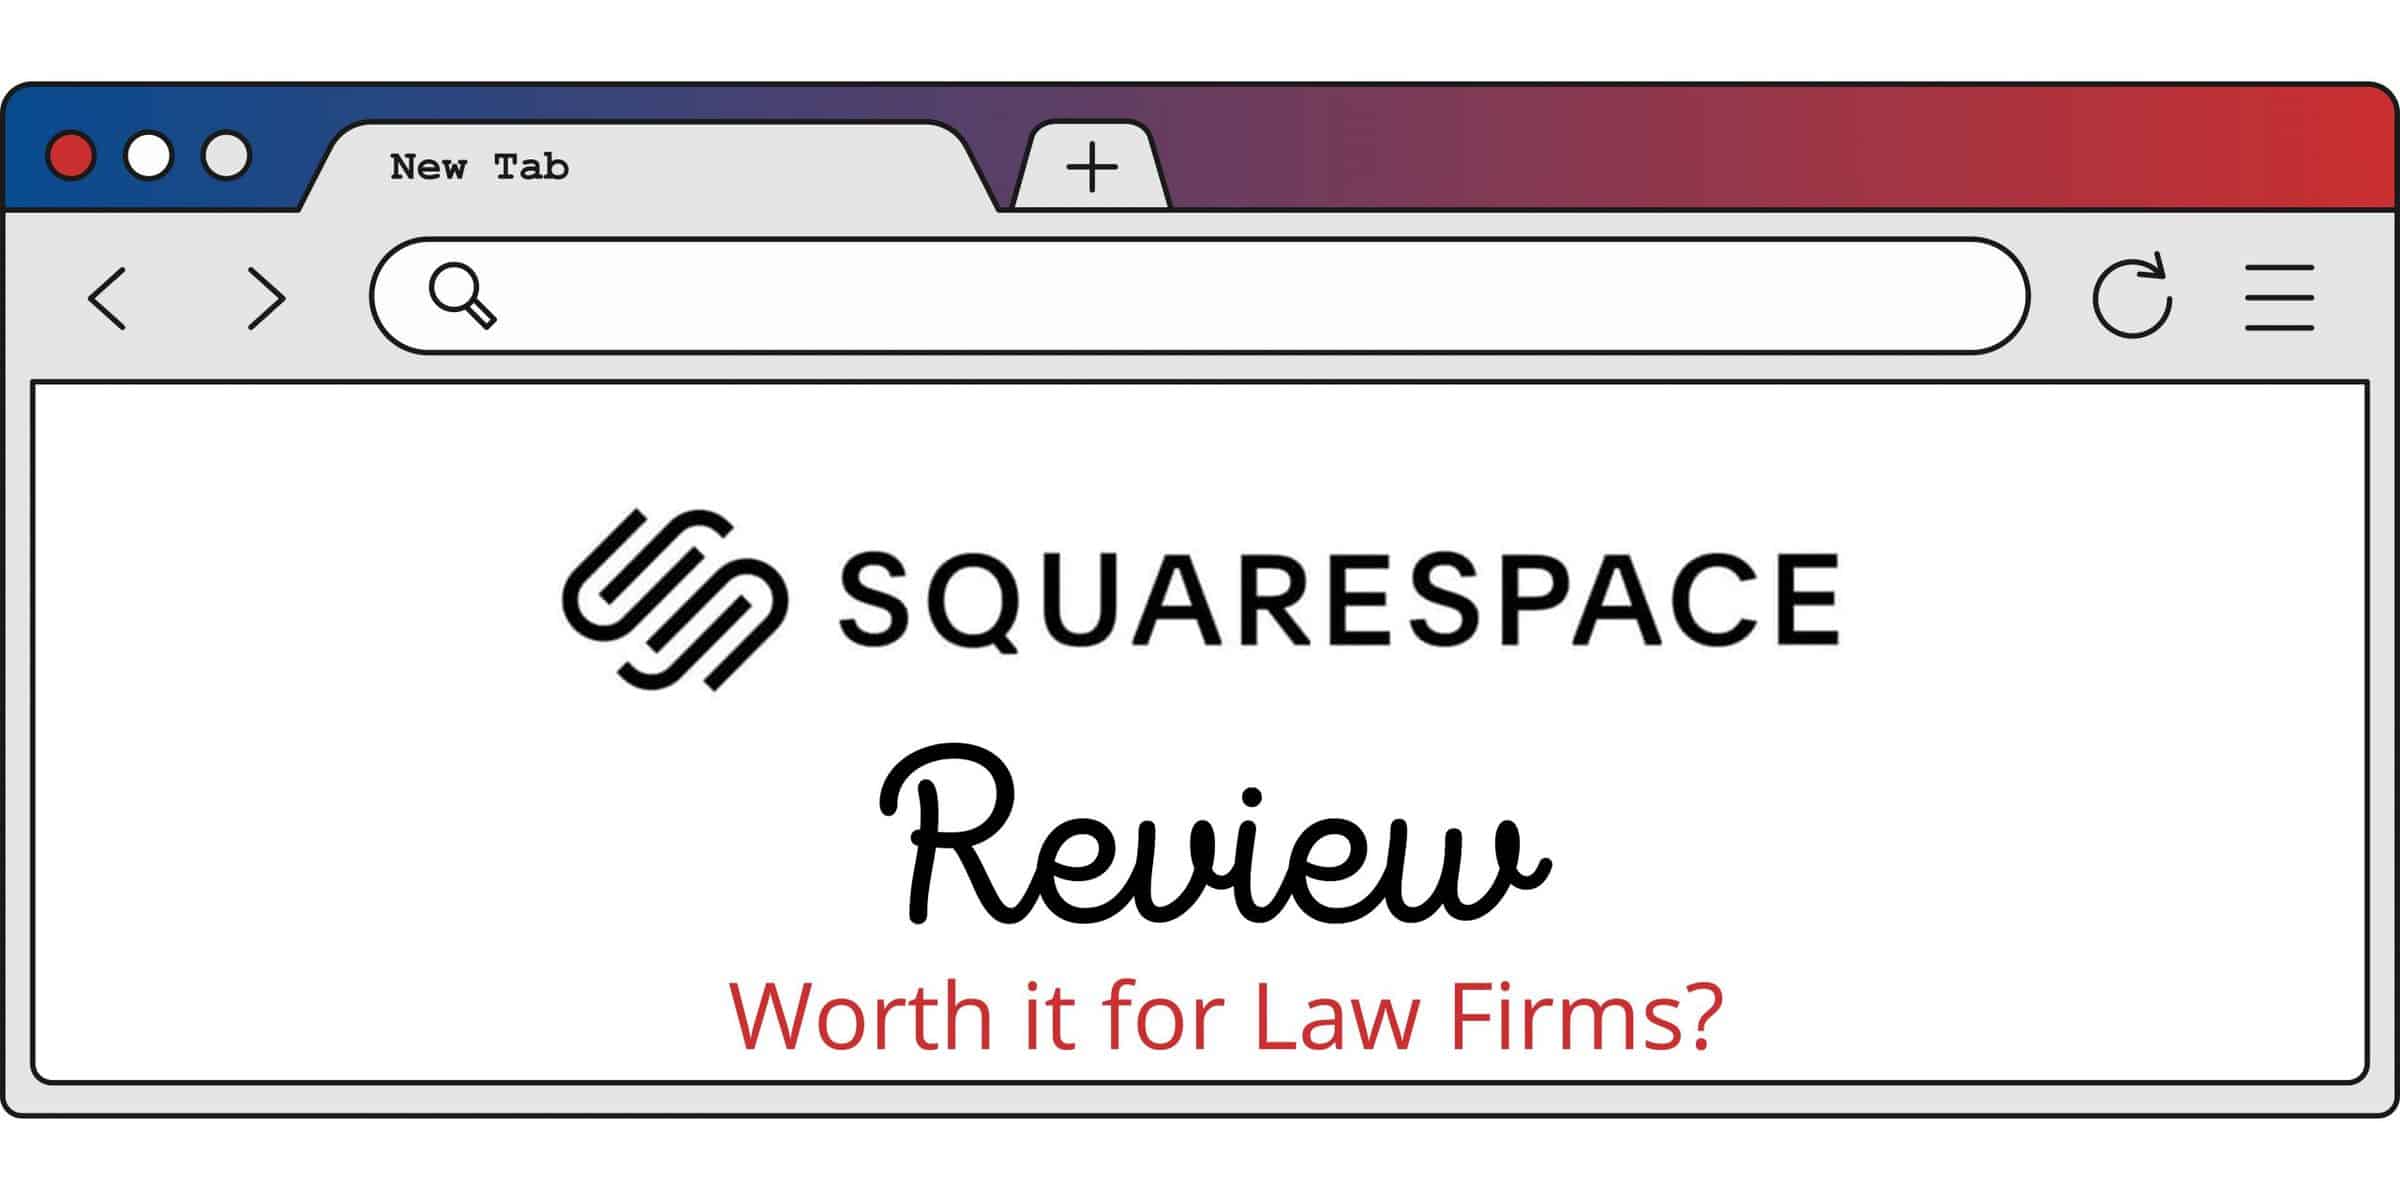 Squarespace Review Websites for Law Firms